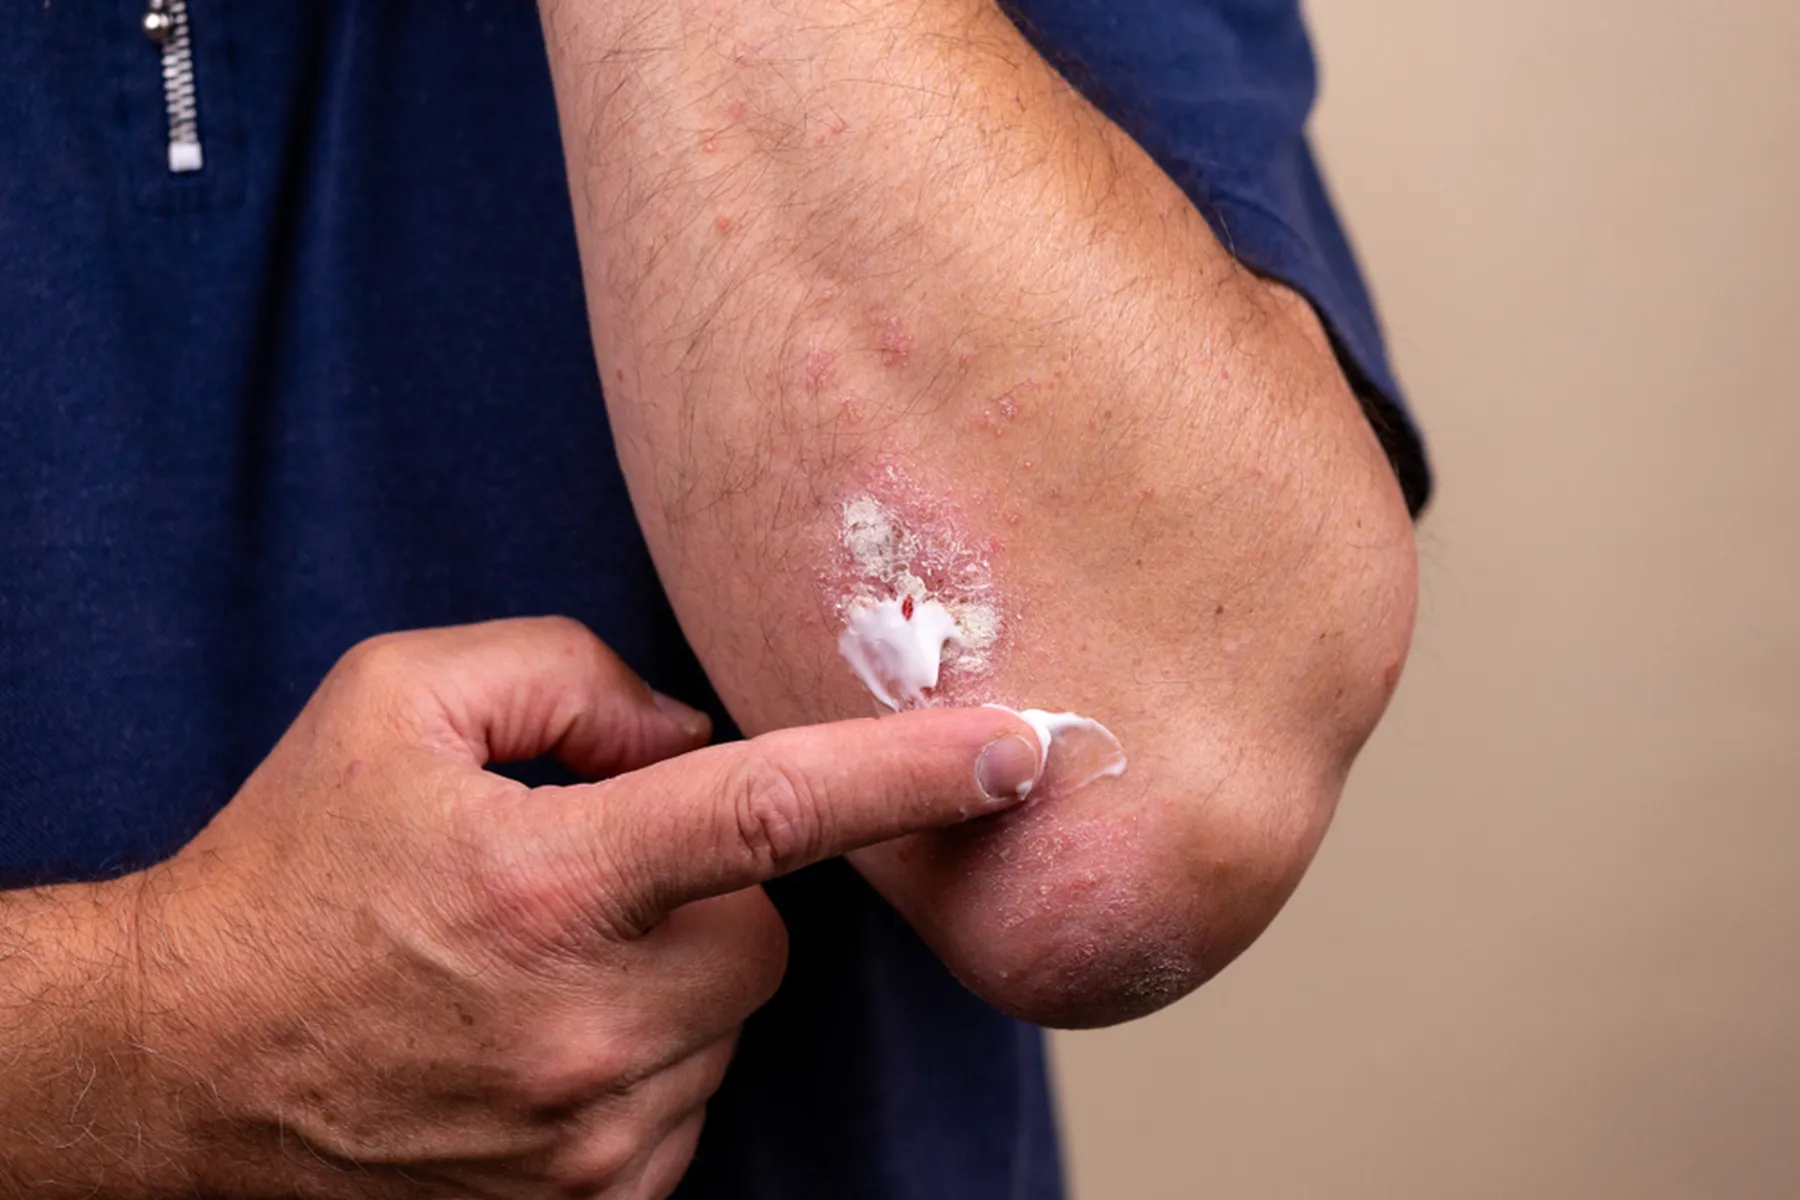 A man applies ointment to a rash on his forearm.